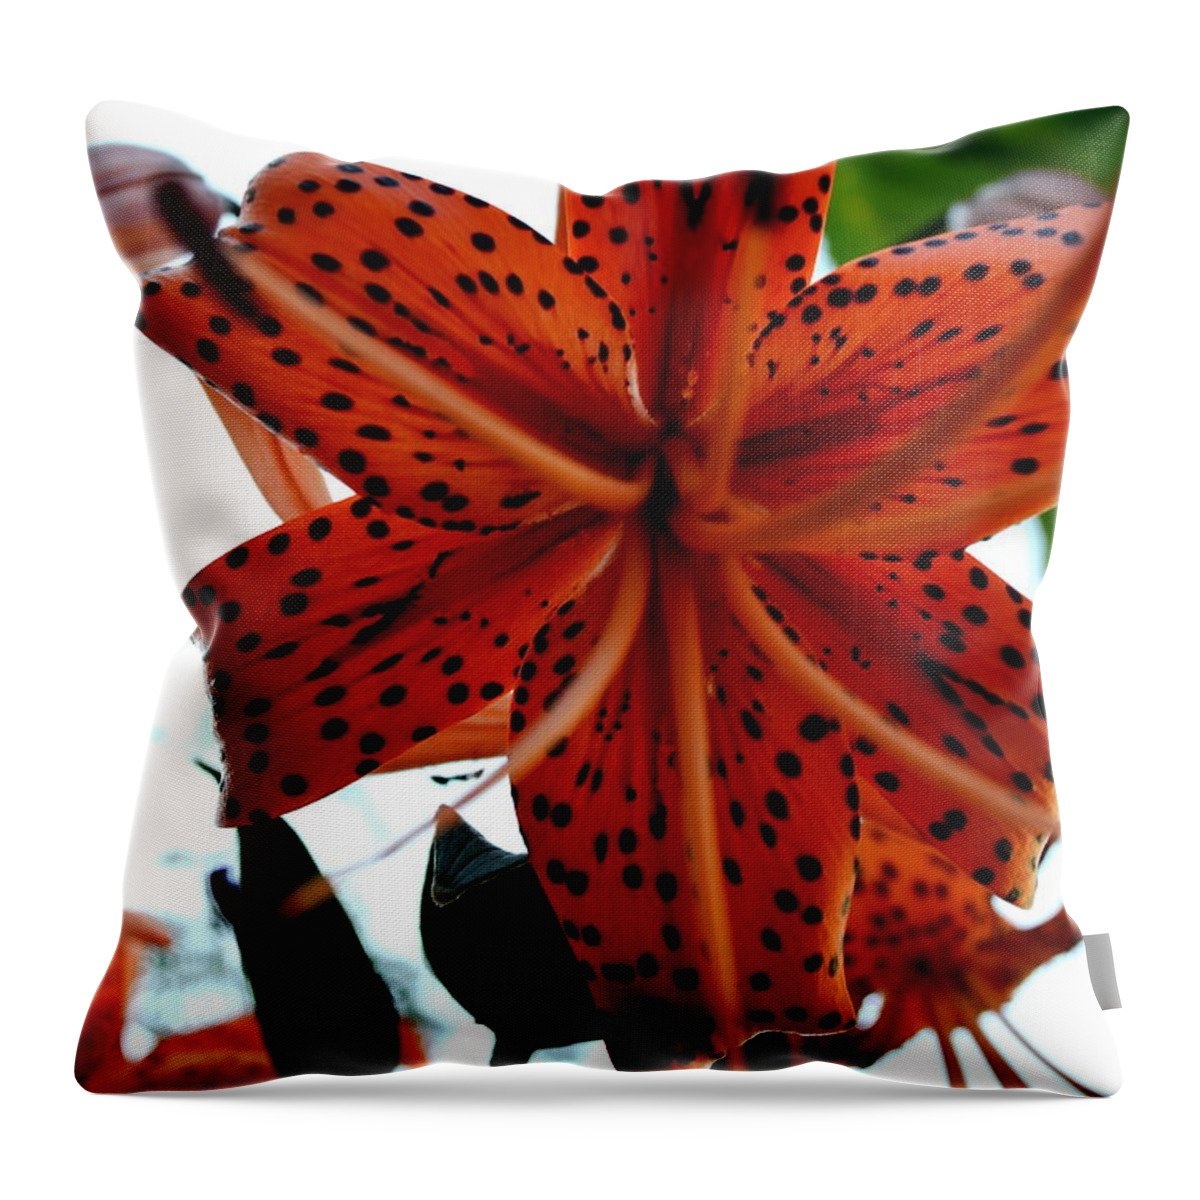 Dragon Throw Pillow featuring the photograph Dragon Flower by Gregory Merlin Brown